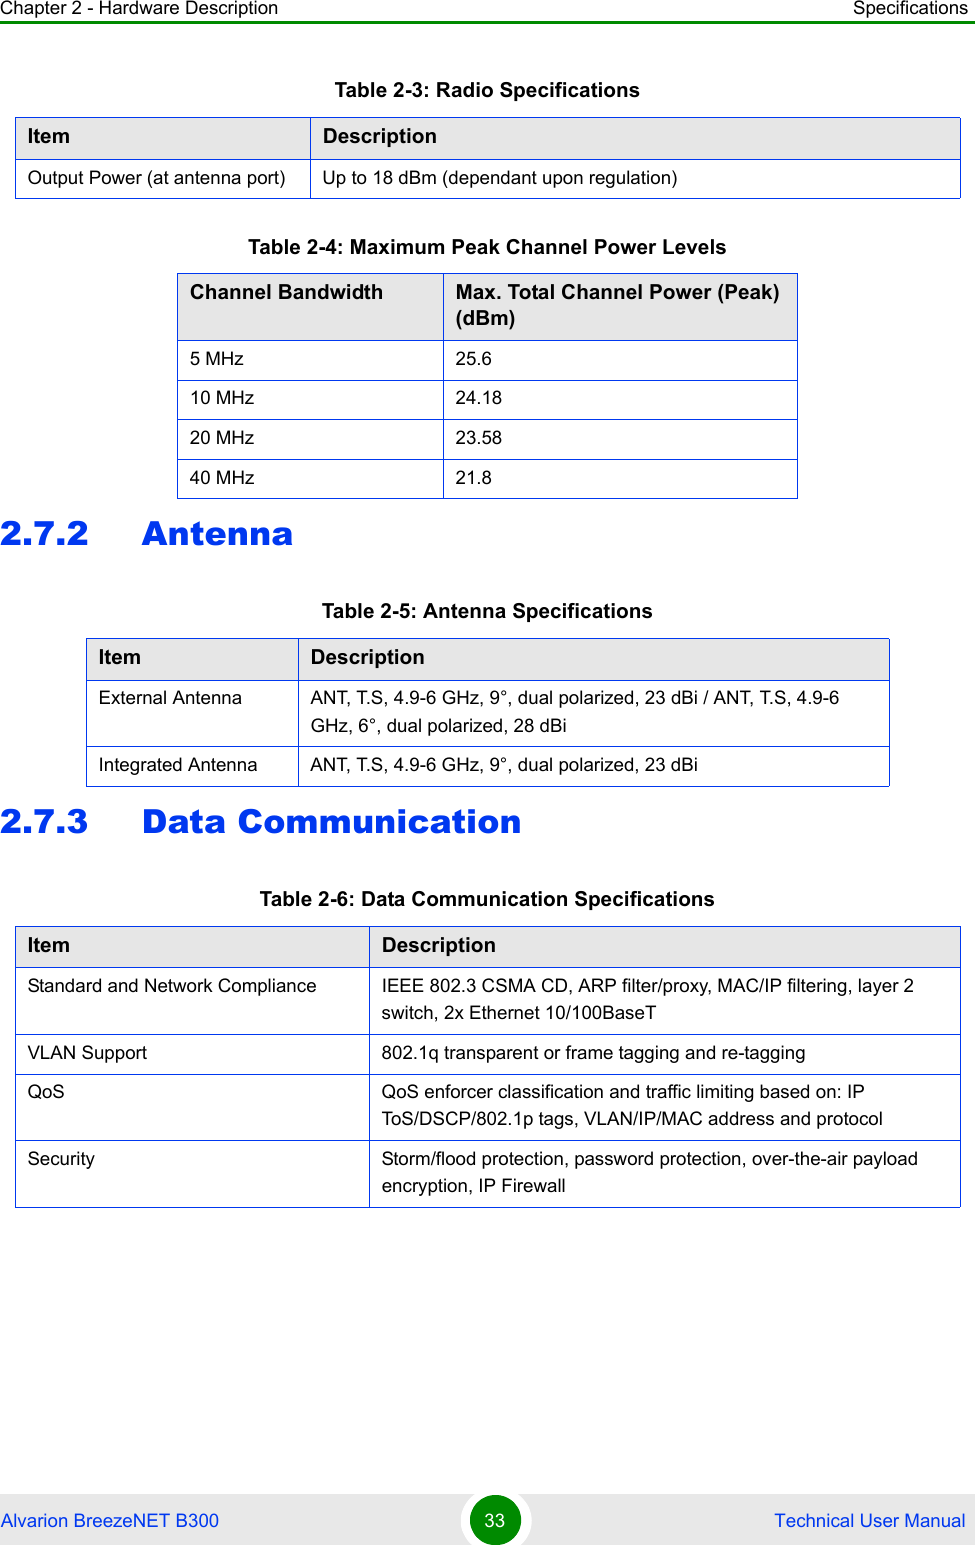 Chapter 2 - Hardware Description SpecificationsAlvarion BreezeNET B300 33  Technical User Manual2.7.2 Antenna2.7.3 Data CommunicationOutput Power (at antenna port) Up to 18 dBm (dependant upon regulation)Table 2-4: Maximum Peak Channel Power LevelsChannel Bandwidth Max. Total Channel Power (Peak)(dBm)5 MHz 25.610 MHz 24.1820 MHz 23.5840 MHz 21.8Table 2-5: Antenna SpecificationsItem DescriptionExternal Antenna ANT, T.S, 4.9-6 GHz, 9°, dual polarized, 23 dBi / ANT, T.S, 4.9-6 GHz, 6°, dual polarized, 28 dBiIntegrated Antenna ANT, T.S, 4.9-6 GHz, 9°, dual polarized, 23 dBiTable 2-6: Data Communication SpecificationsItem DescriptionStandard and Network Compliance IEEE 802.3 CSMA CD, ARP filter/proxy, MAC/IP filtering, layer 2 switch, 2x Ethernet 10/100BaseTVLAN Support 802.1q transparent or frame tagging and re-taggingQoS QoS enforcer classification and traffic limiting based on: IP ToS/DSCP/802.1p tags, VLAN/IP/MAC address and protocolSecurity Storm/flood protection, password protection, over-the-air payload encryption, IP FirewallTable 2-3: Radio SpecificationsItem Description